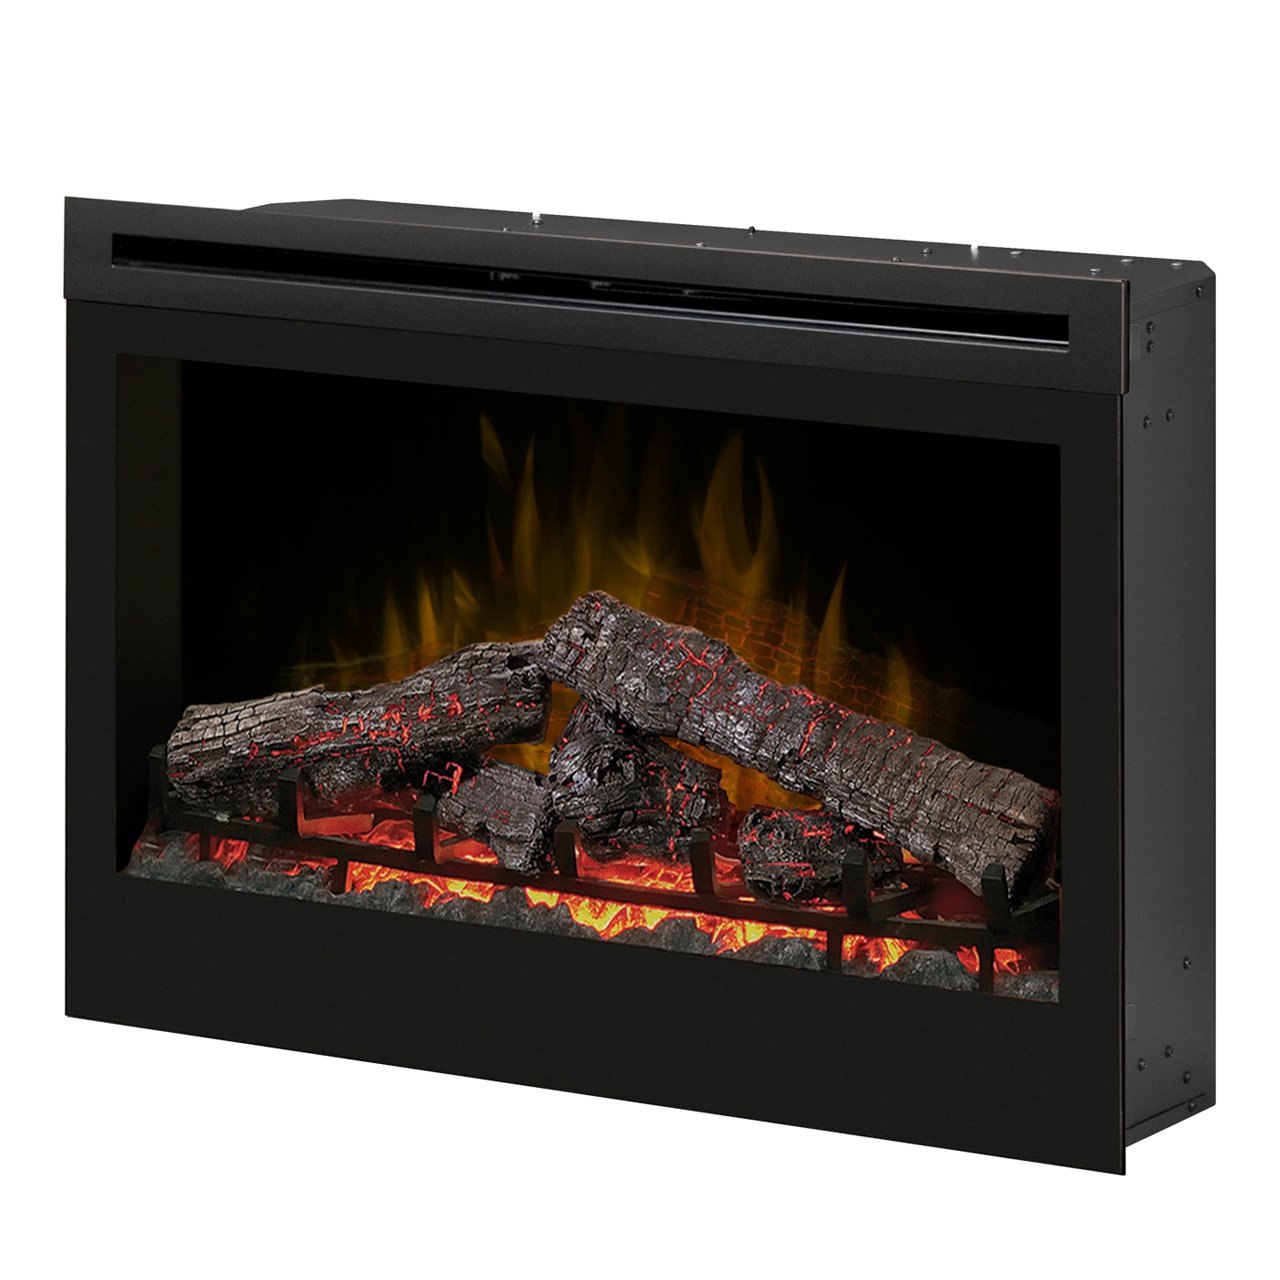 Outdoor Electric Fireplace Best Of Dimplex Df3033st 33 Inch Self Trimming Electric Fireplace Insert